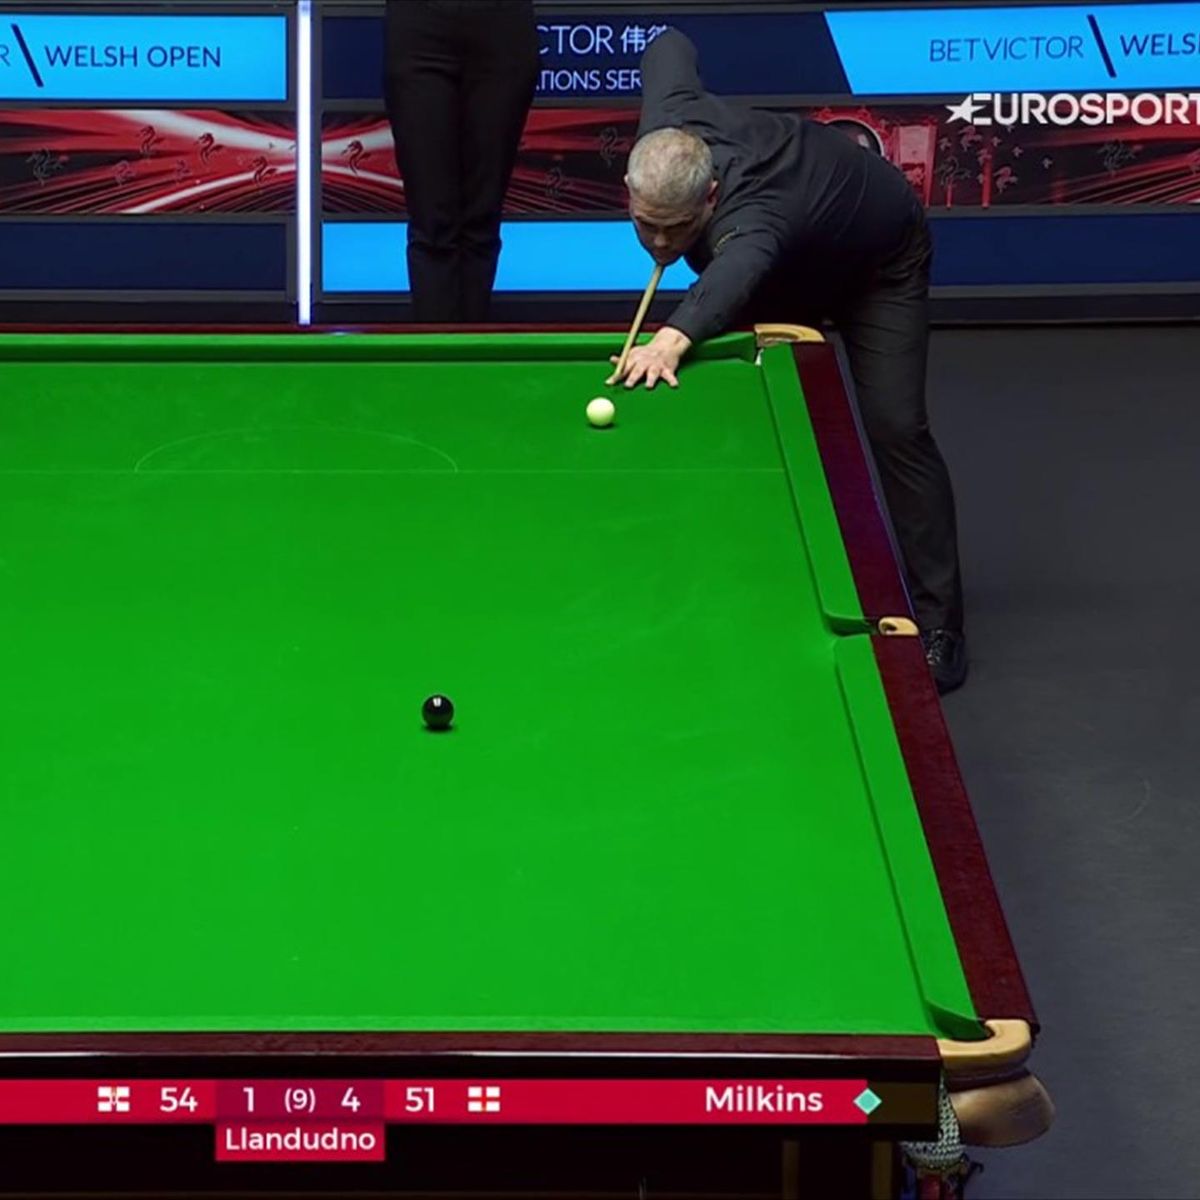 What a shot to win it - Robert Milkins beats Mark Allen with stunning black to finish - Snooker video